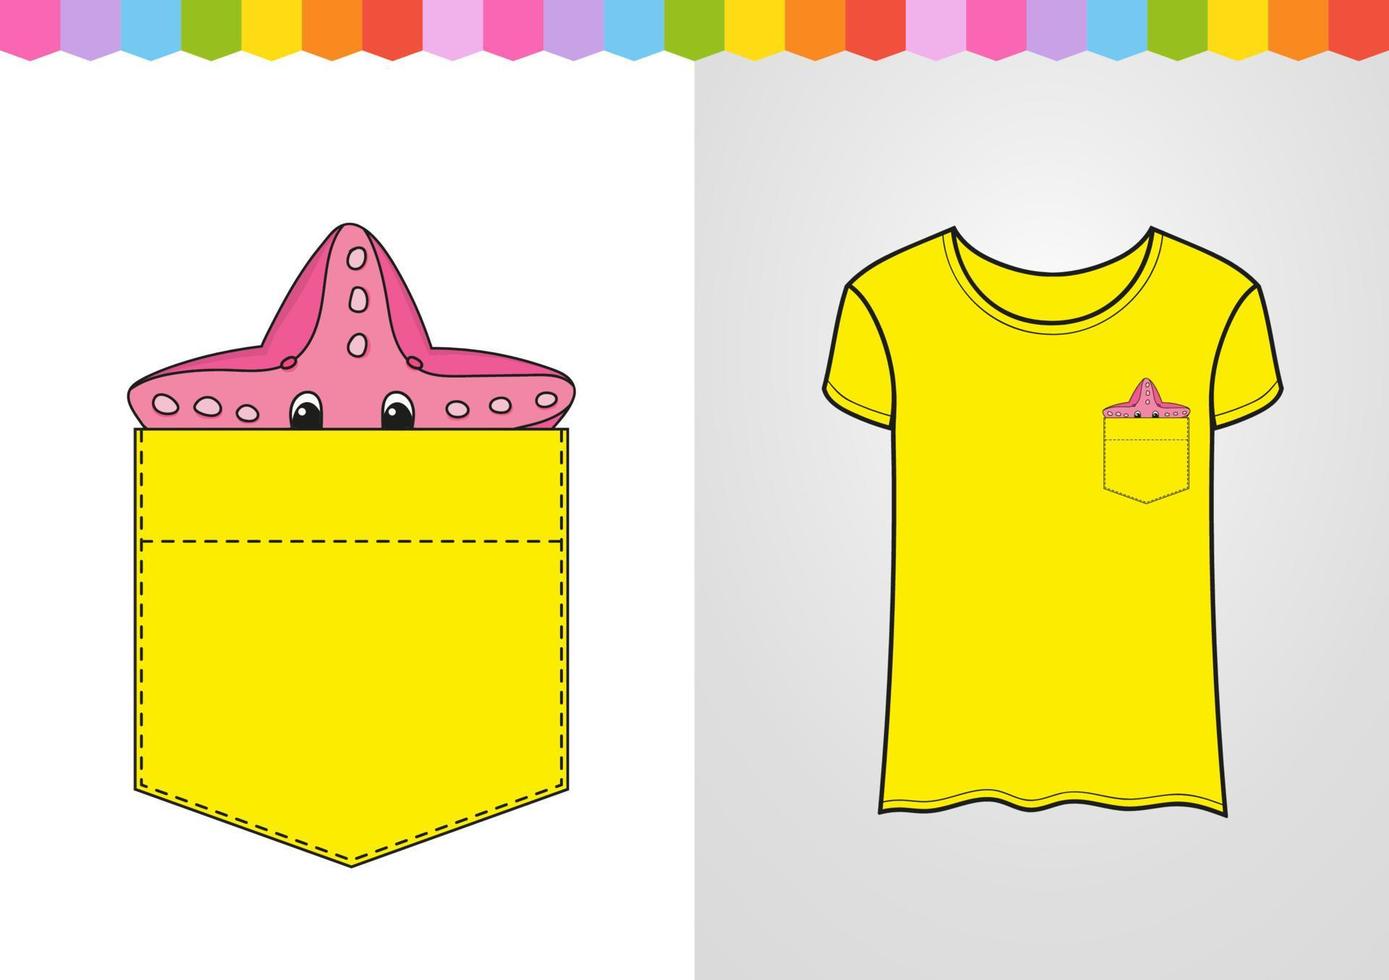 Starfish in shirt pocket. Cute character. Colorful vector illustration. Cartoon style. Isolated on white background. Design element. Template for your shirts.